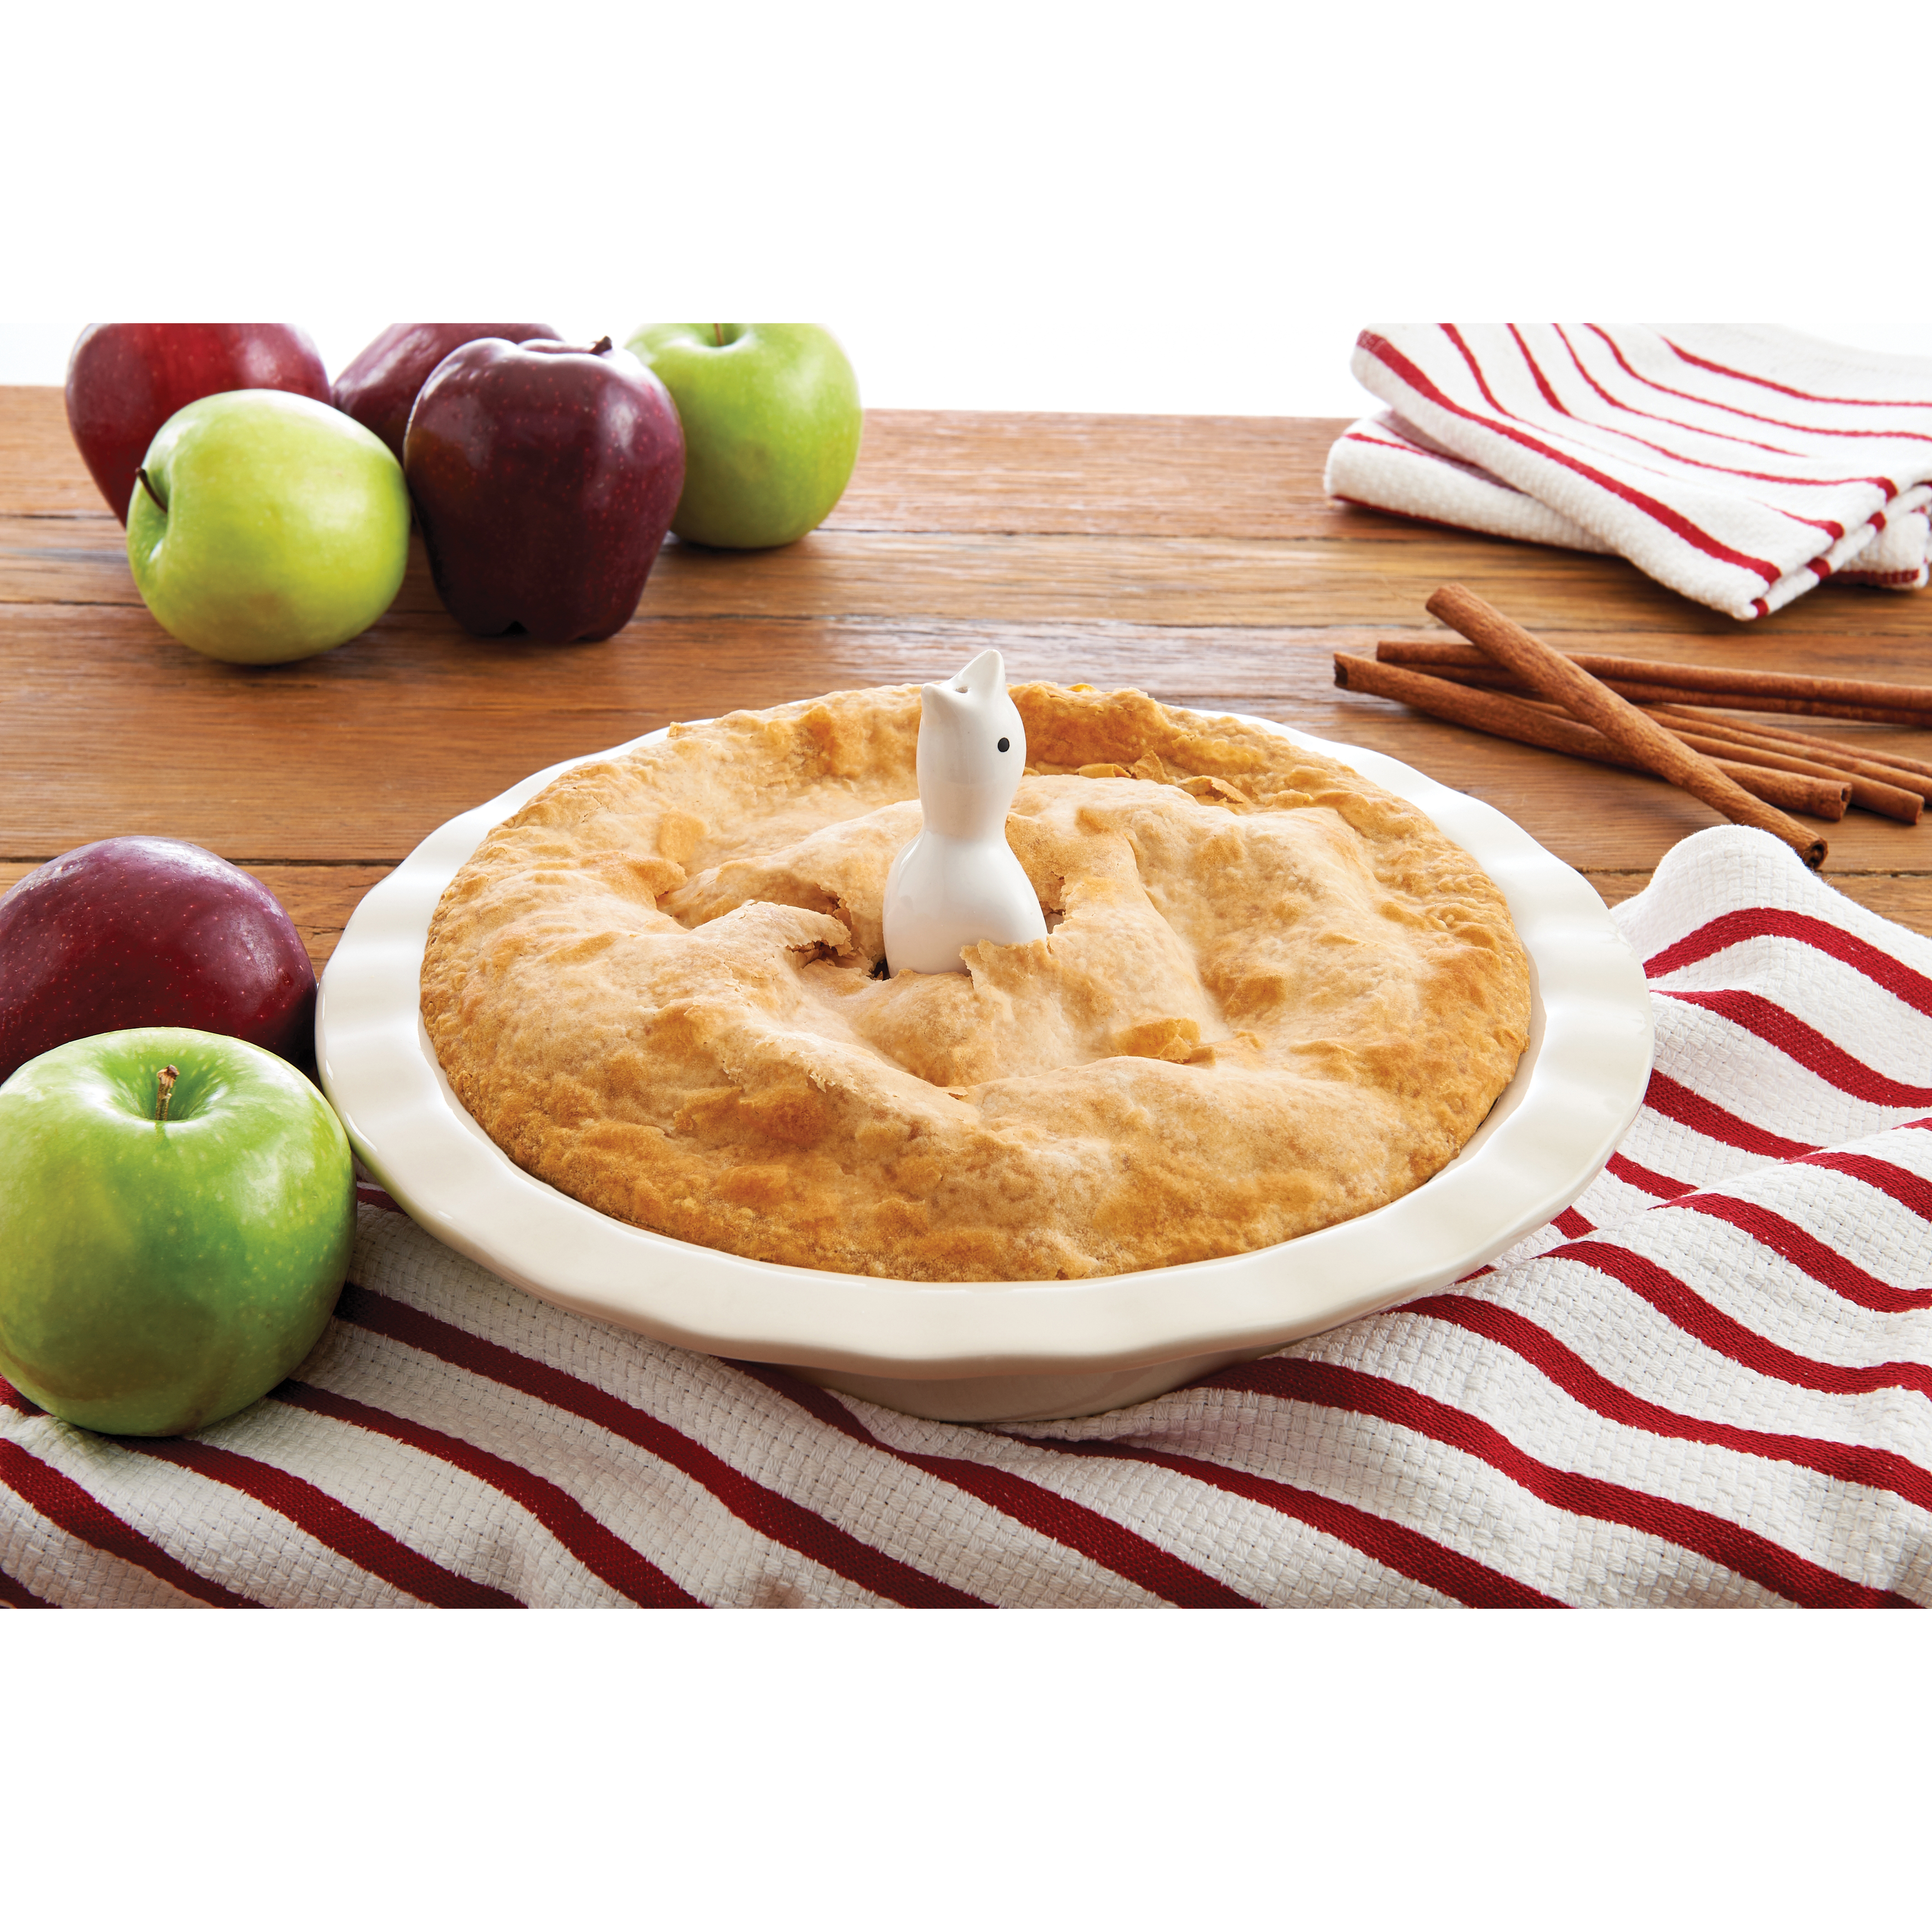 Mrs Anderson's Baking 98063 Pie Plate, 9.5 qt Capacity, 9-1/2 in Dia, Ceramic, White, Dishwasher Safe: Yes - 4